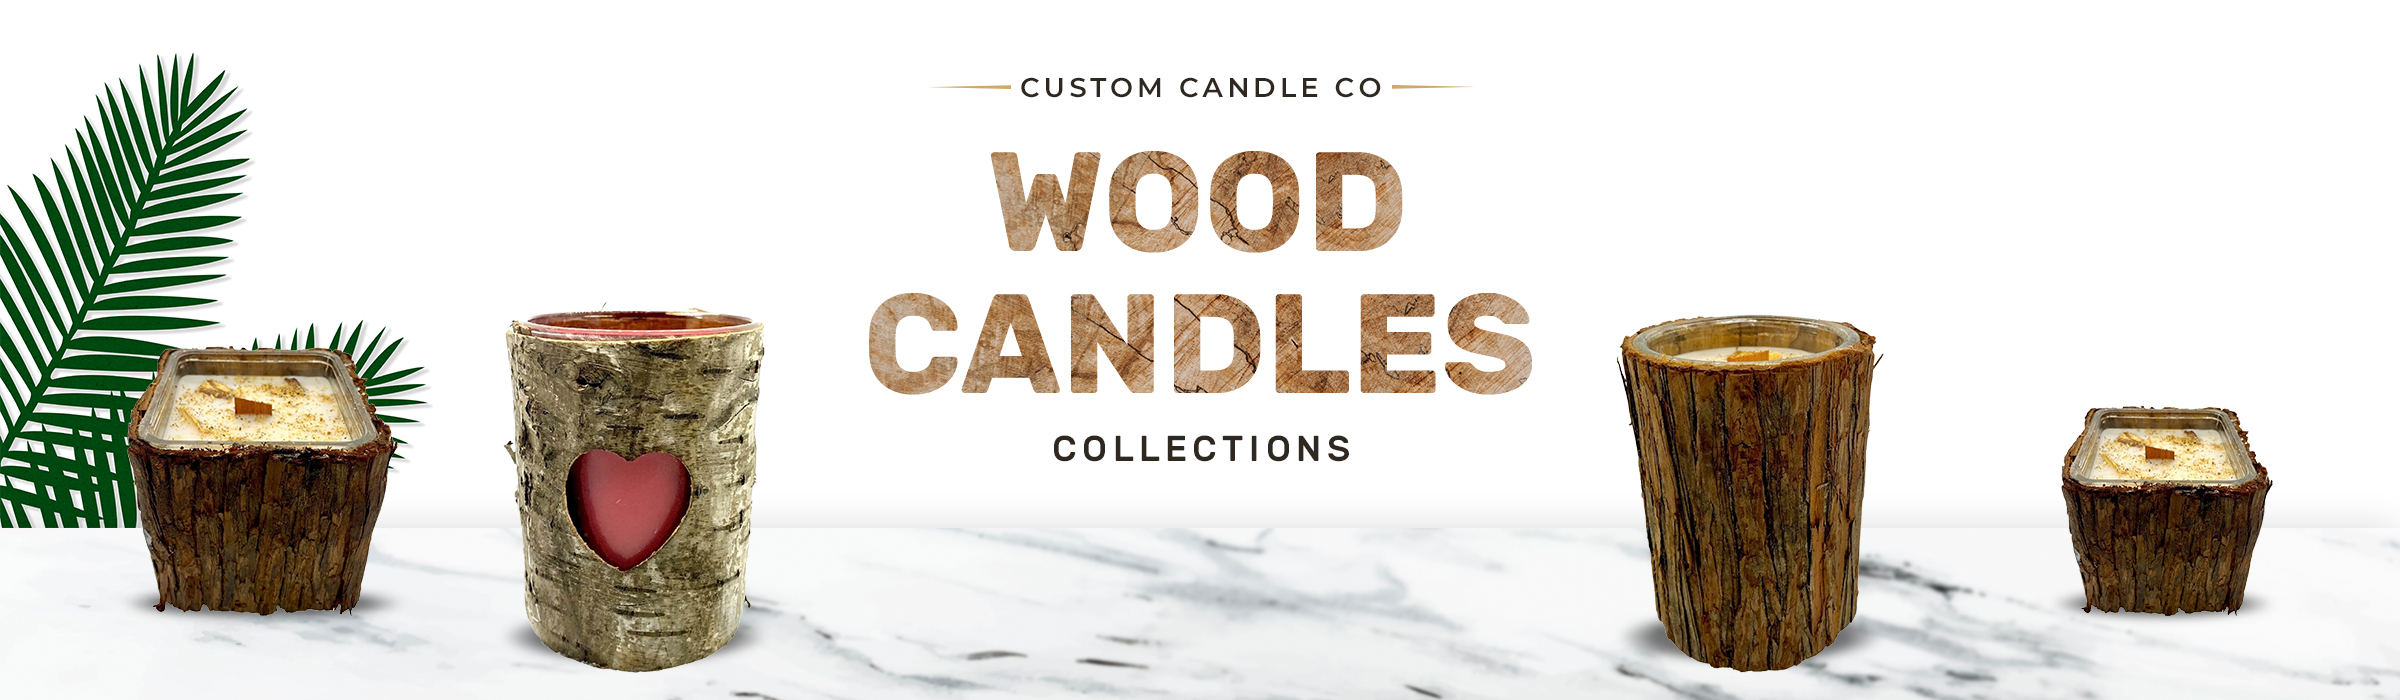 Wood Collection candles banner.